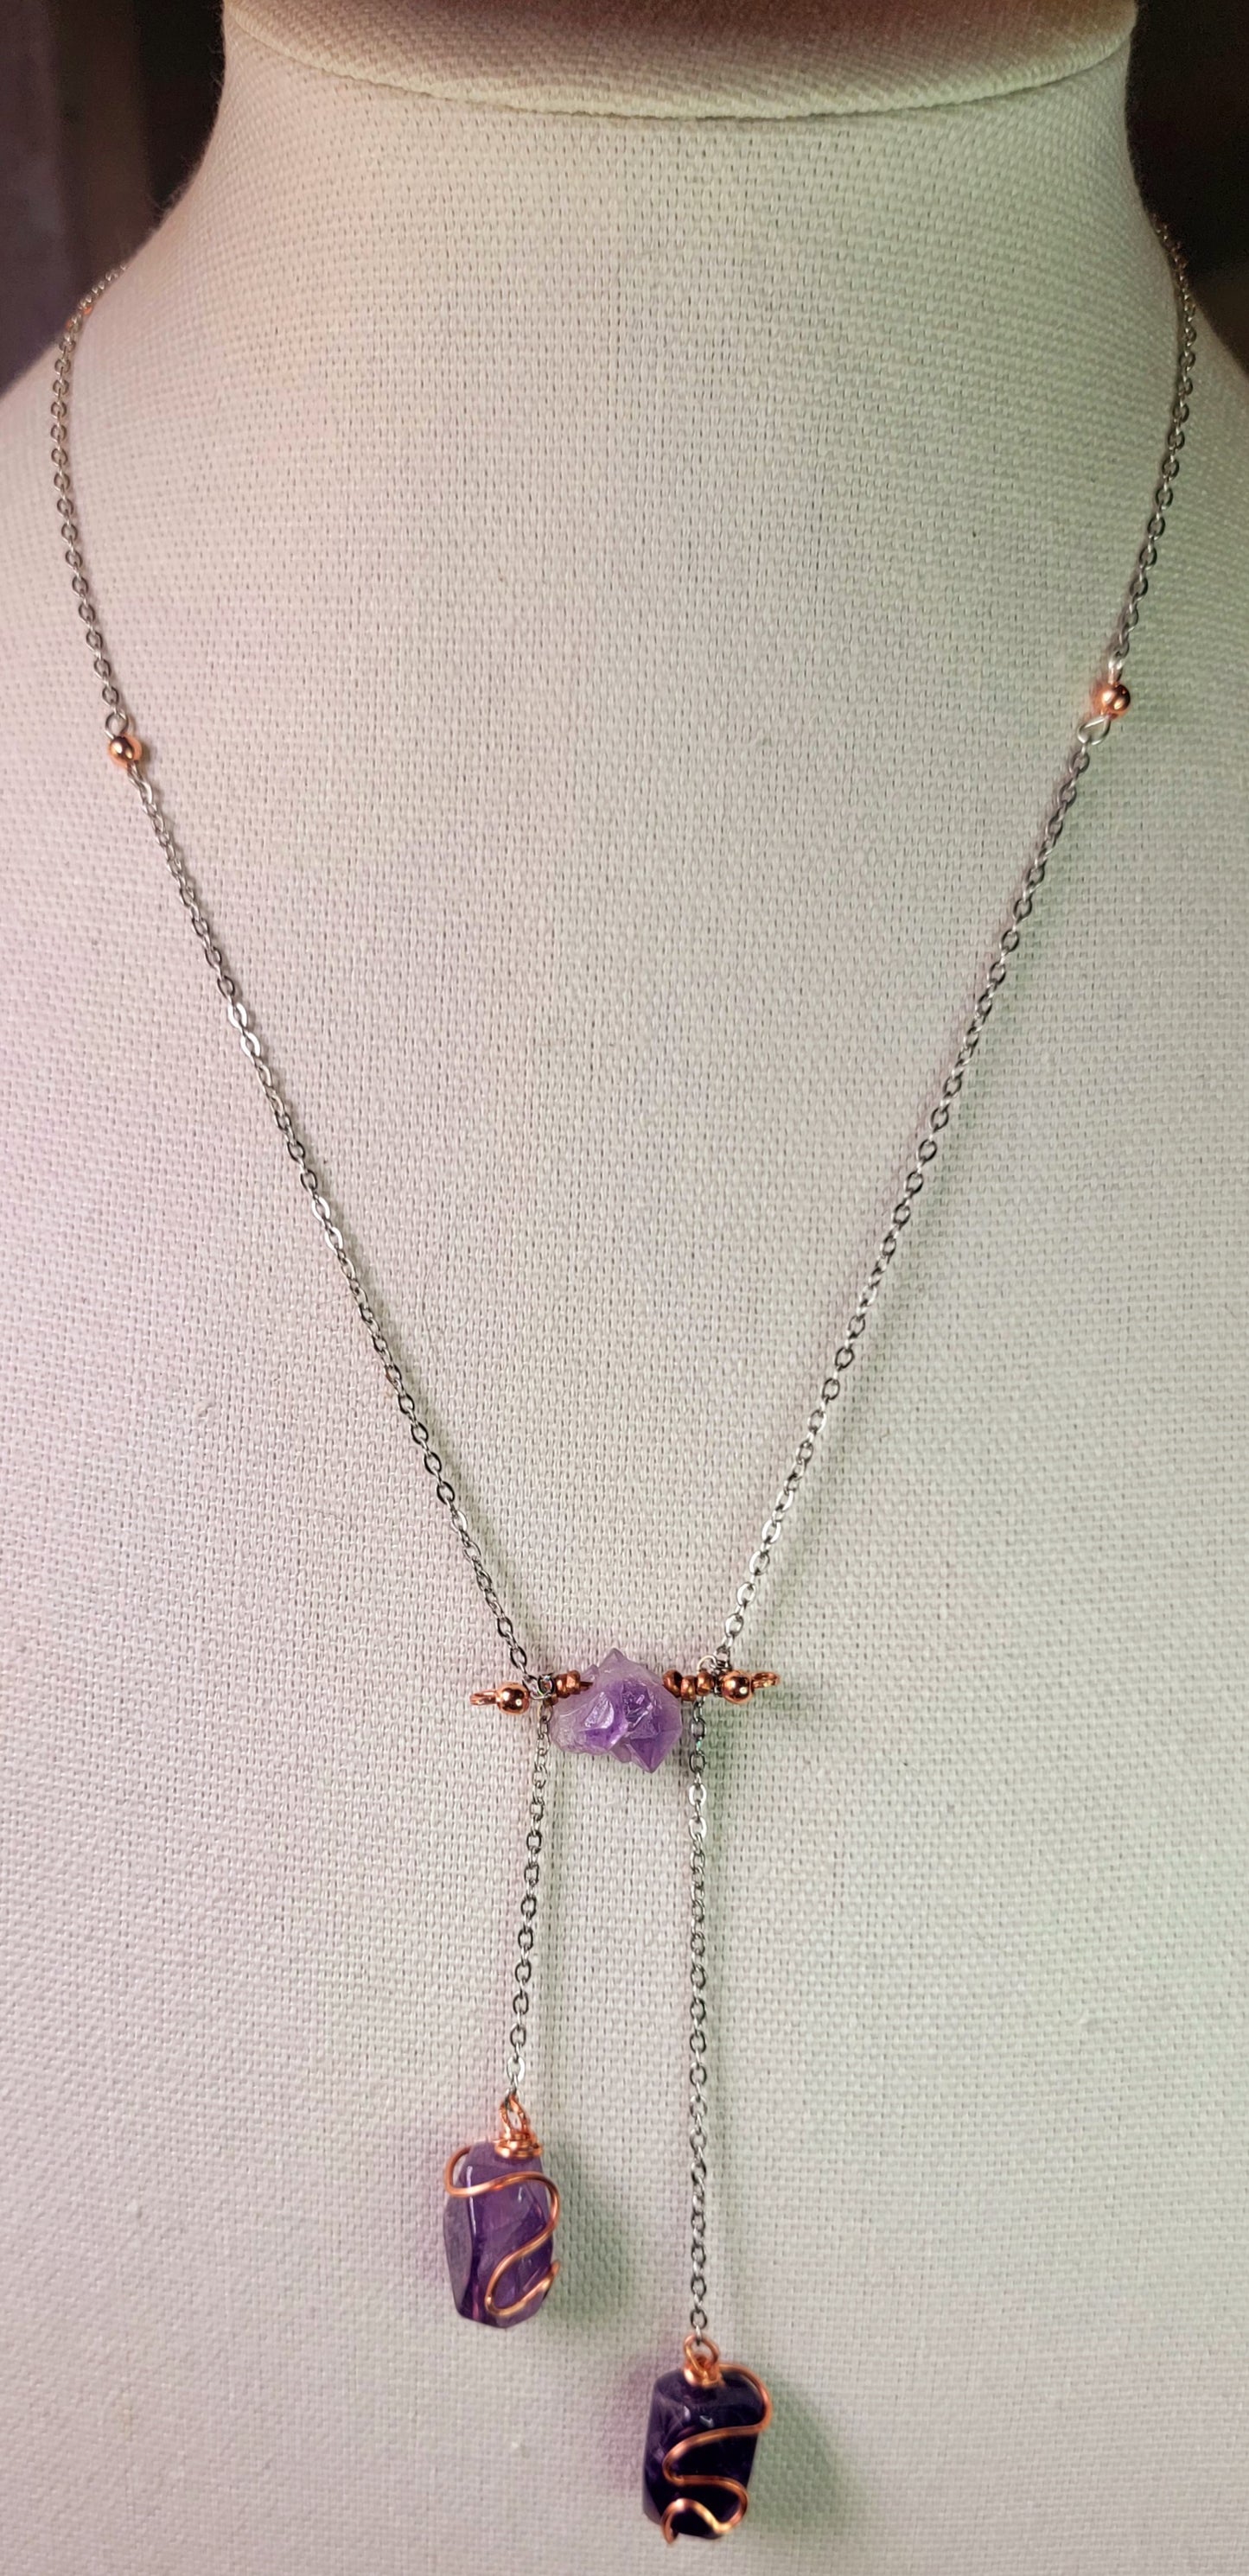 Necklace - Amethyst, Copper and Silver